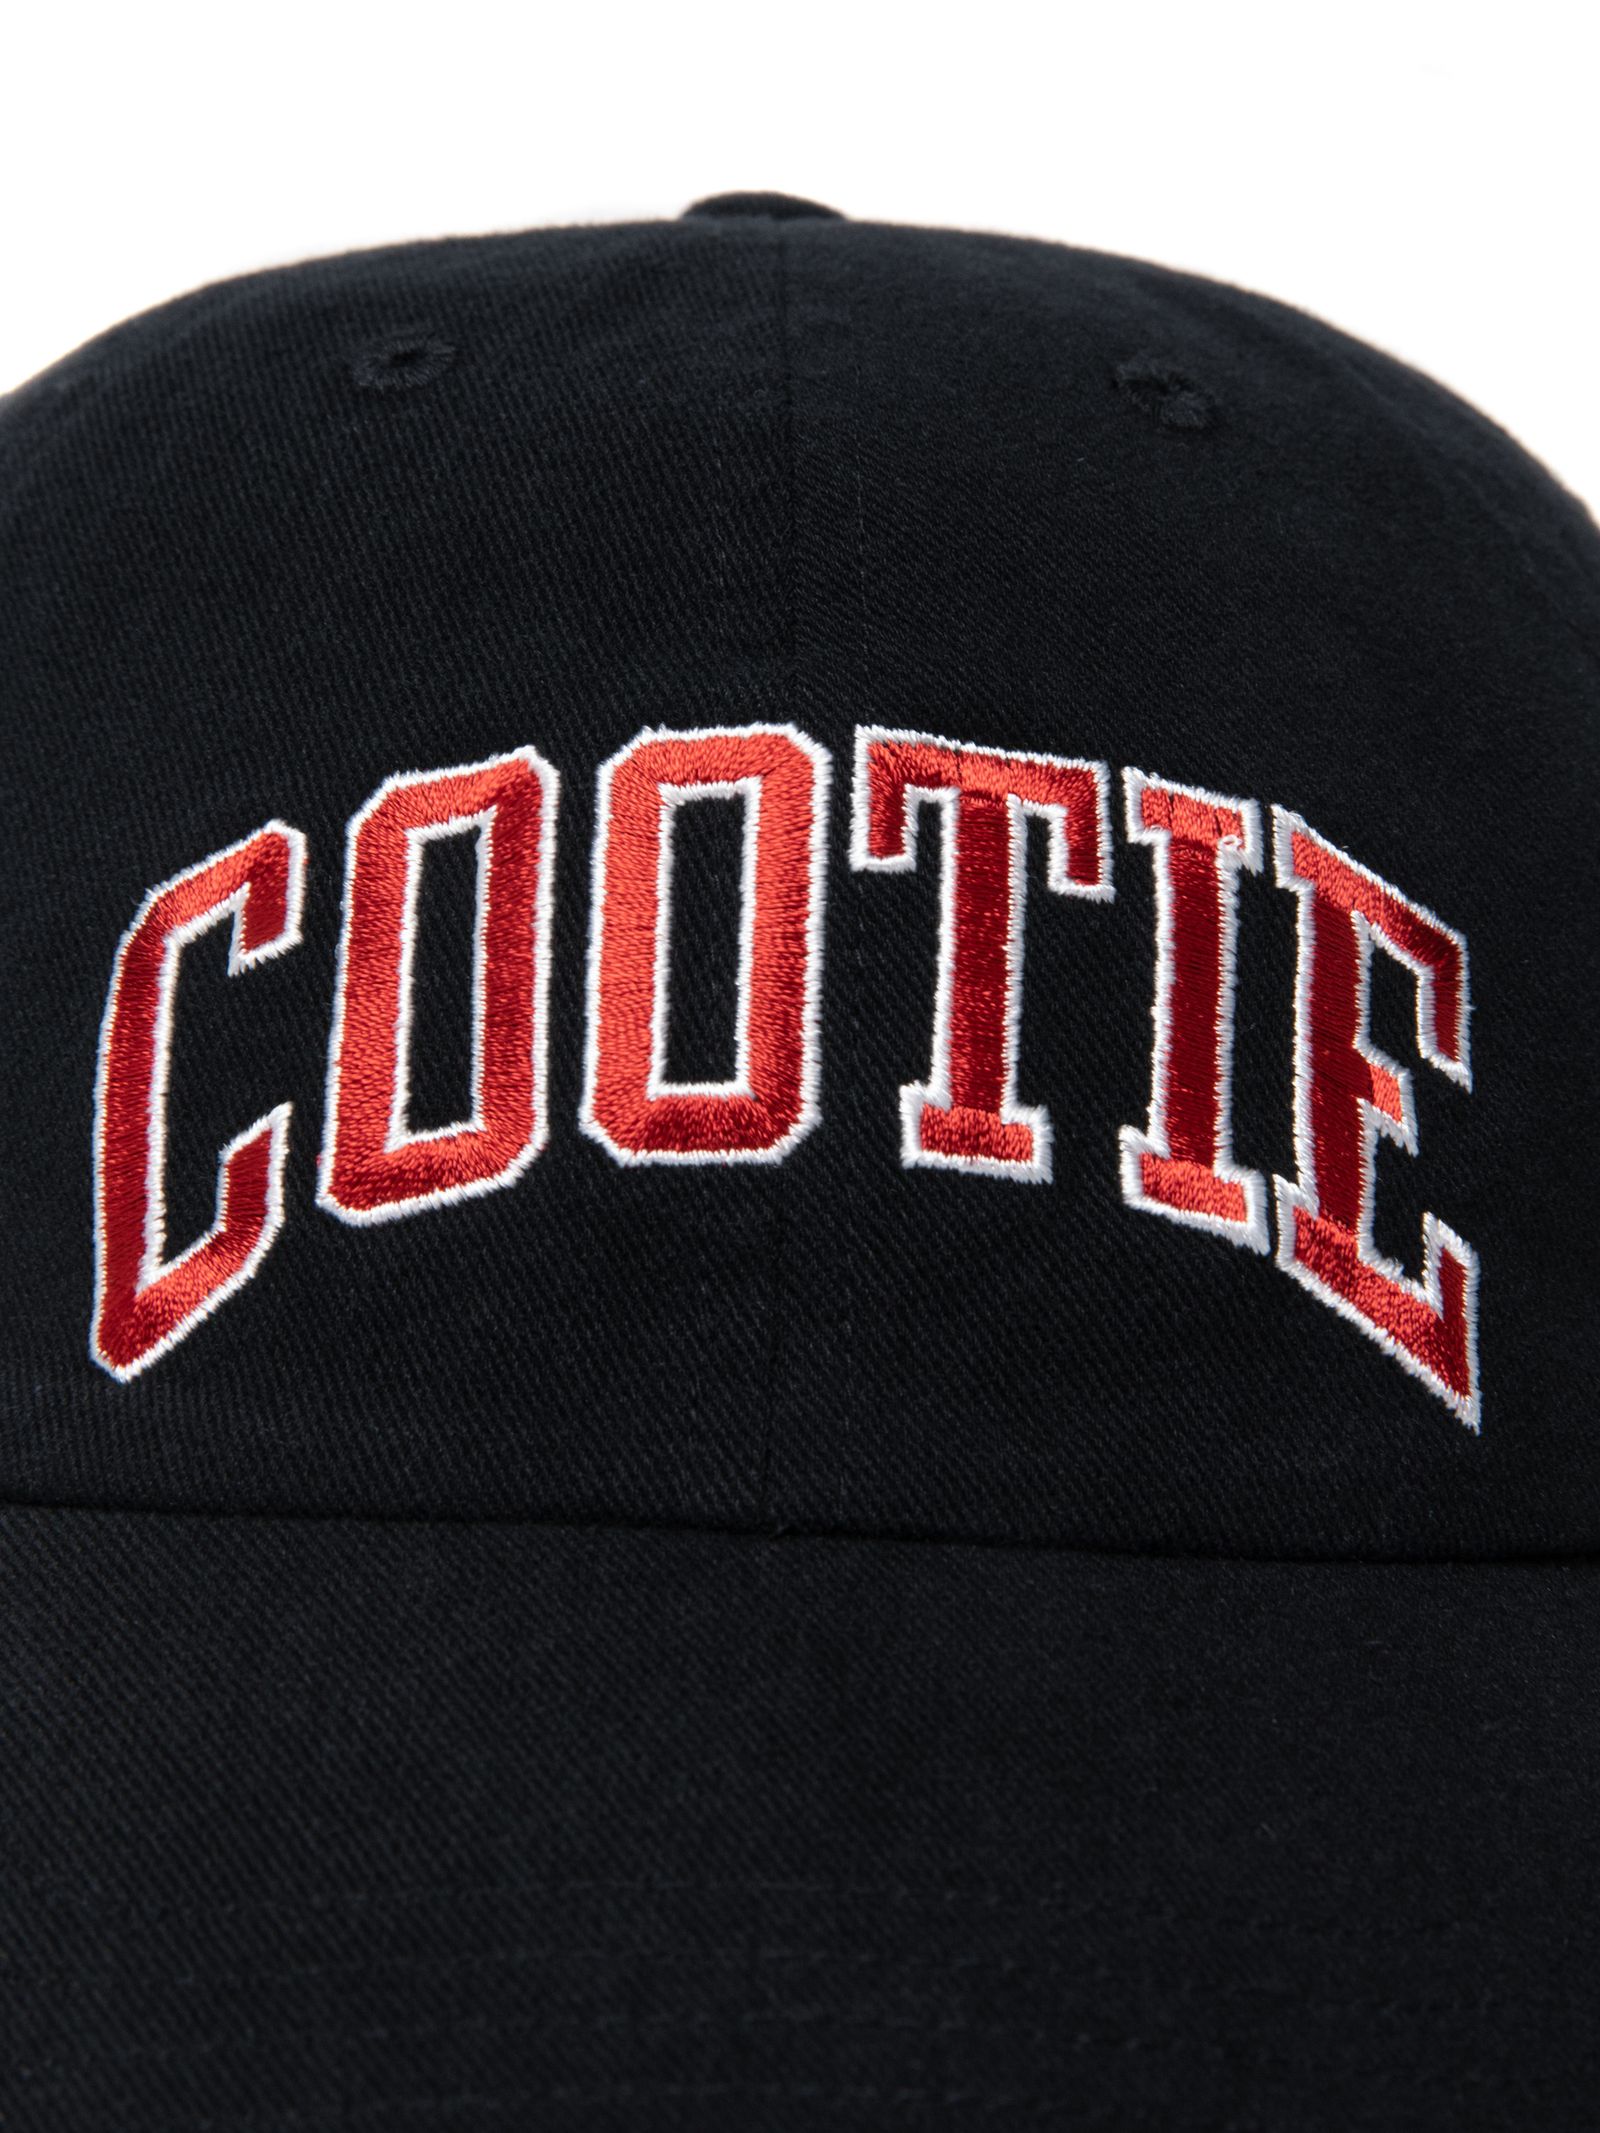 COOTIE PRODUCTIONS - Embroidery 6 Panel Cap (BLACK) / ロゴ ベース